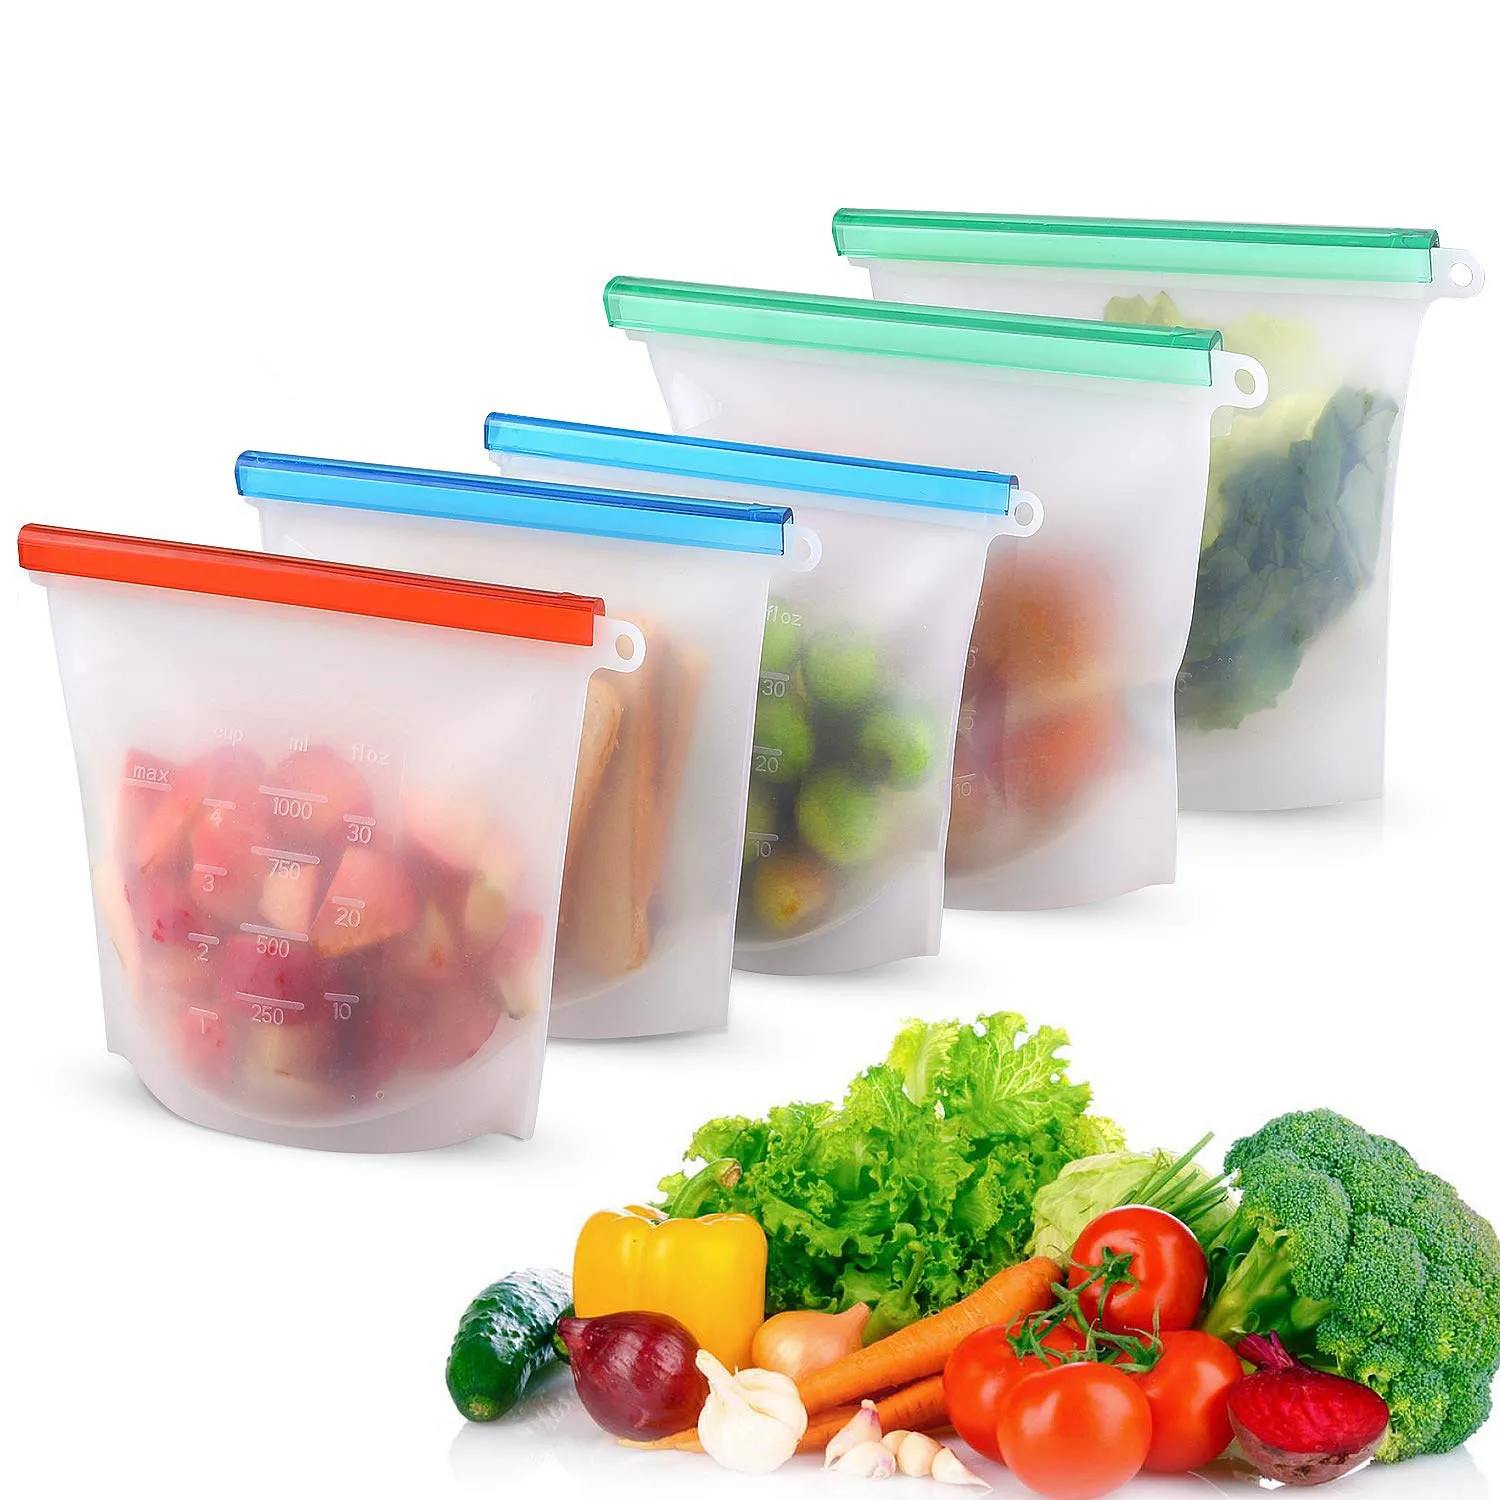 

Silicone Food Storage Containers Leakproof Containers Reusable Stand Up Zip Shut Bag Cup Fresh Bag Food Storage Bag Fresh Wrap, Transparent